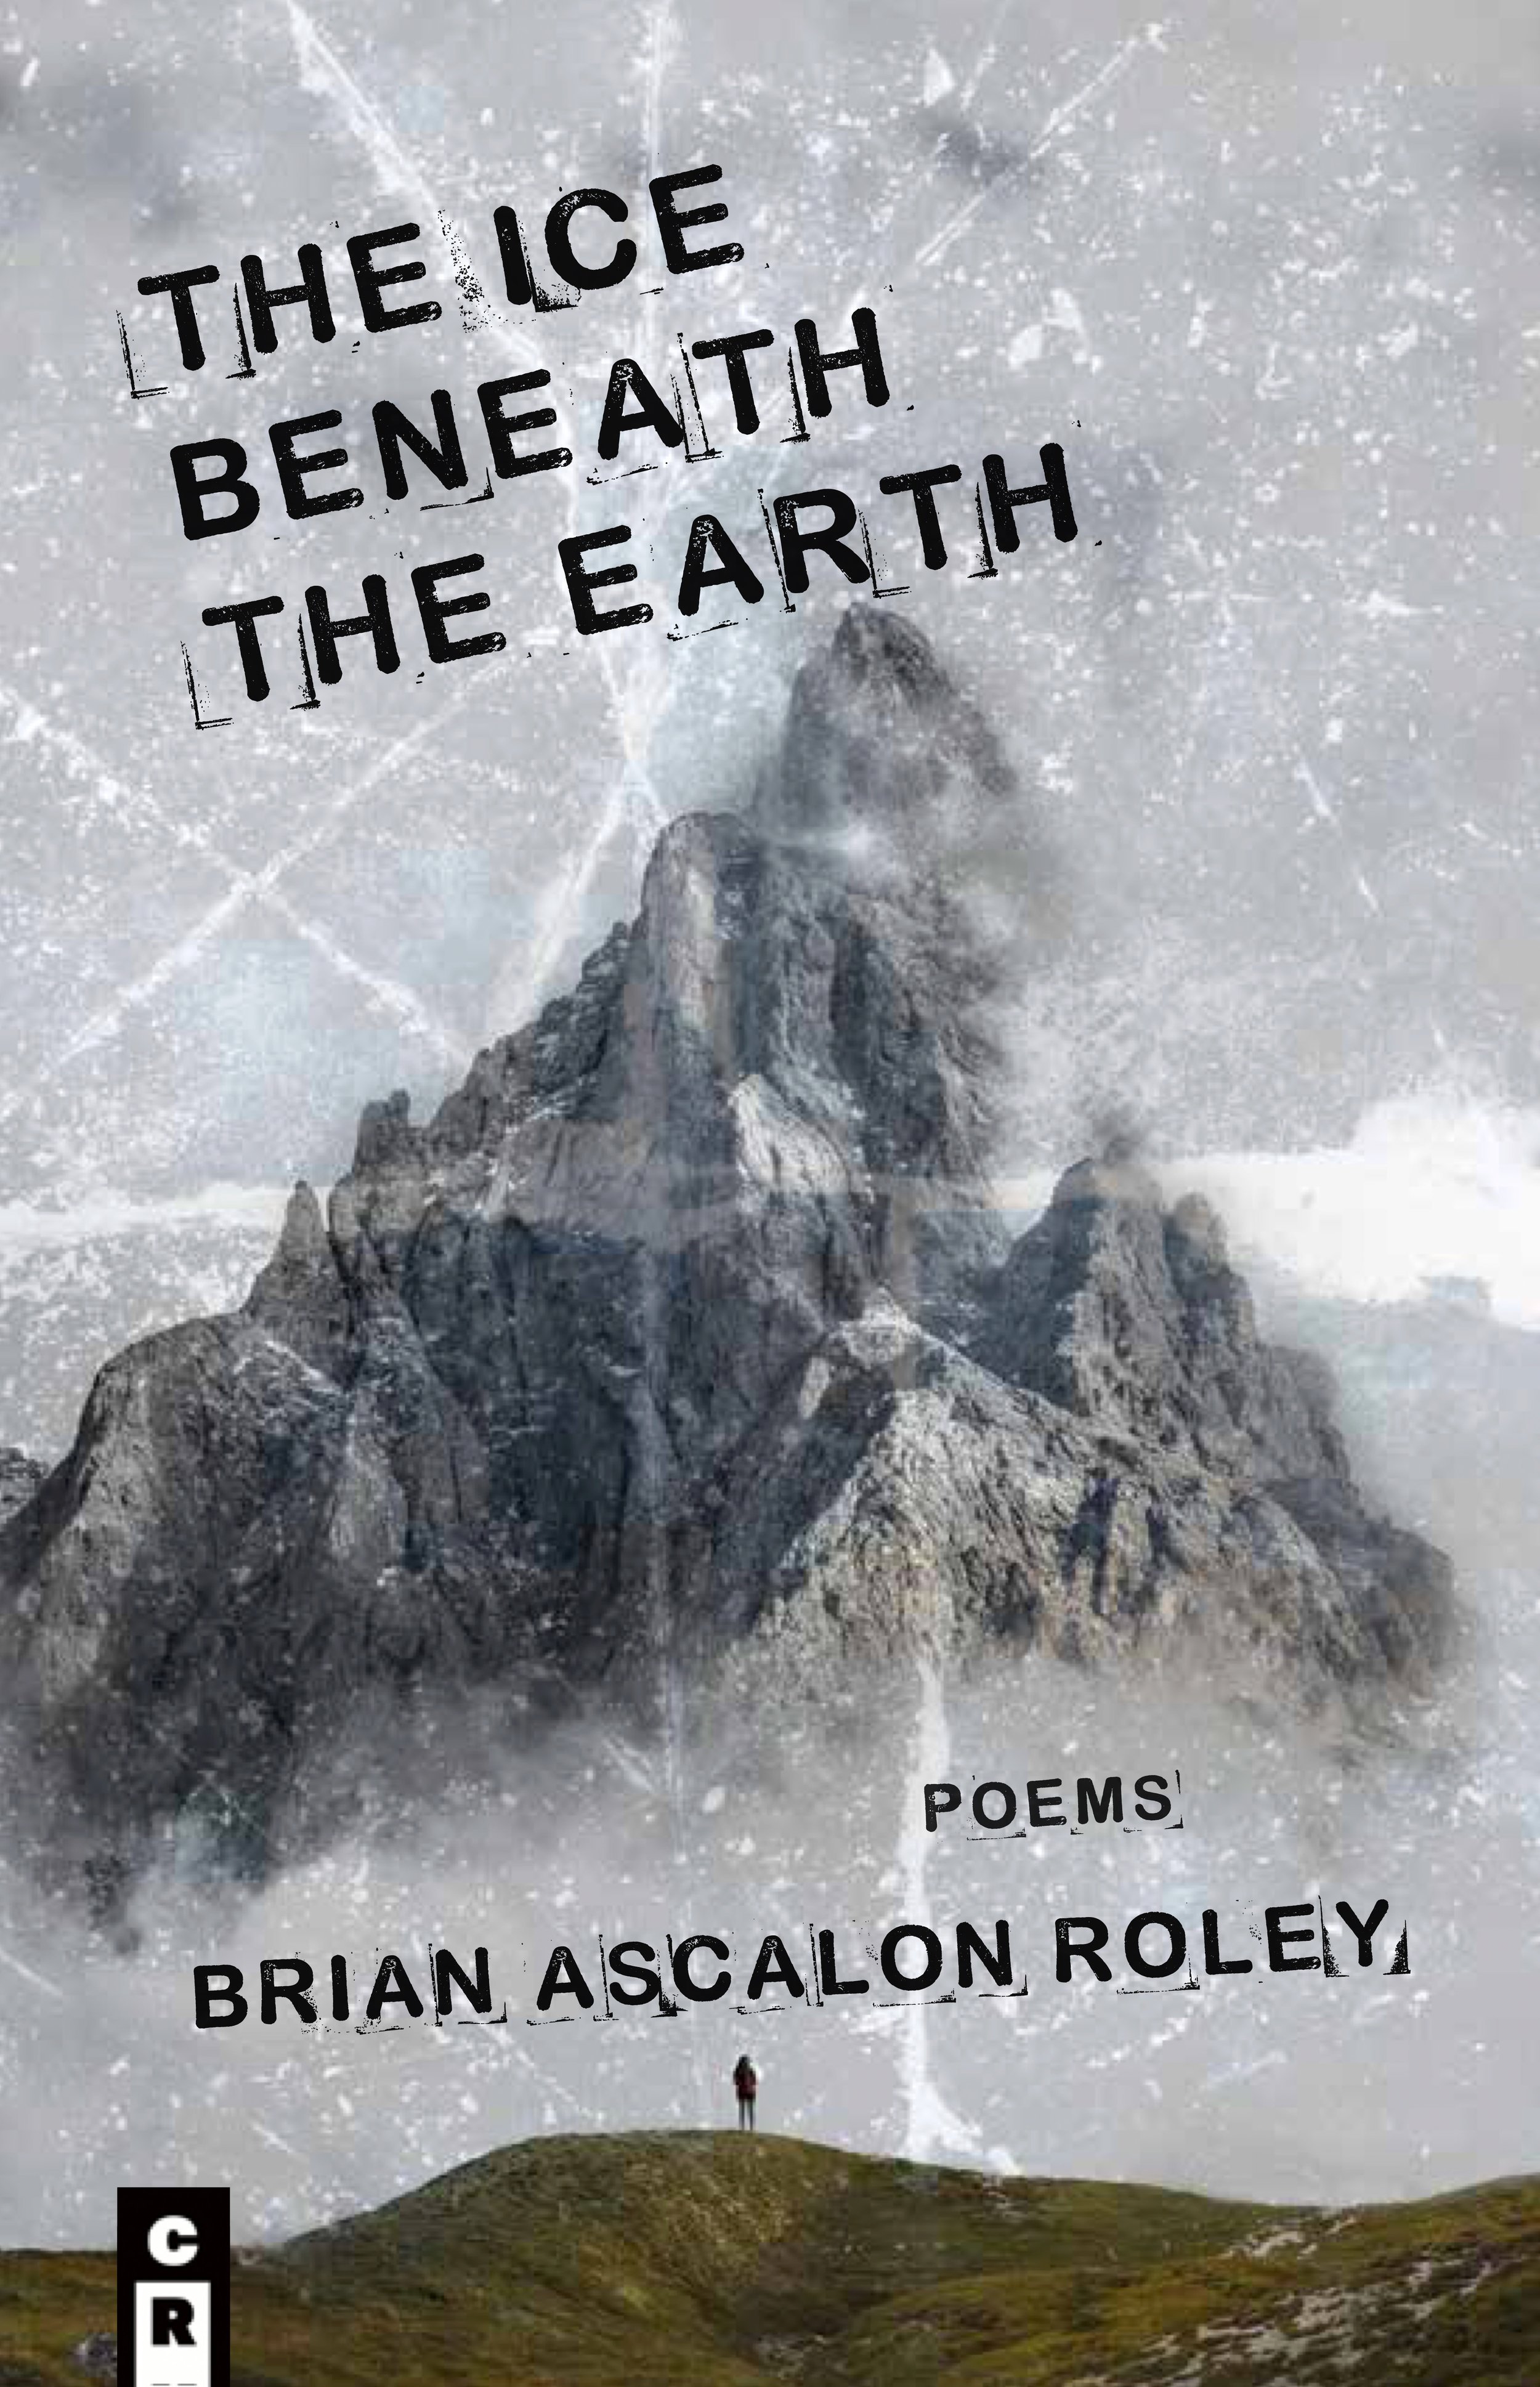 The+Ice+Beneath+the+Earth+Full+Cover+Proof.jpeg